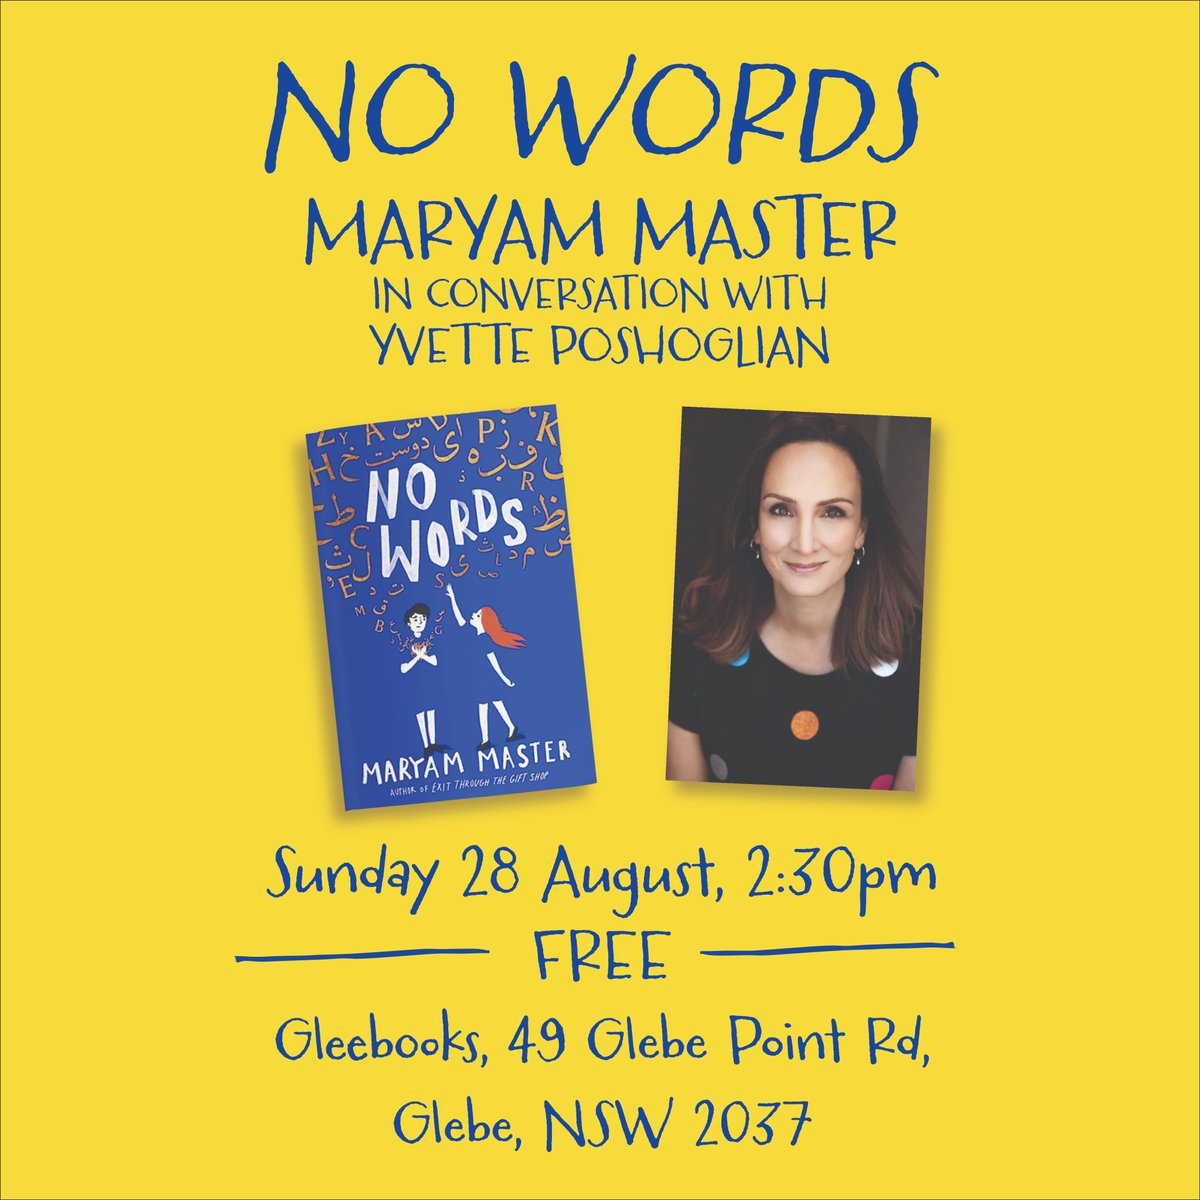 Sydney! This Sunday at 2:30pm, the wonderful @Maryam_Master will be in conversation with @yvetteposh in a #free event at @Gleebooks. Bring your little ones and come on down for a celebration of love, friendship and words! Learn more: gleebooks.com.au/event/maryam-m…